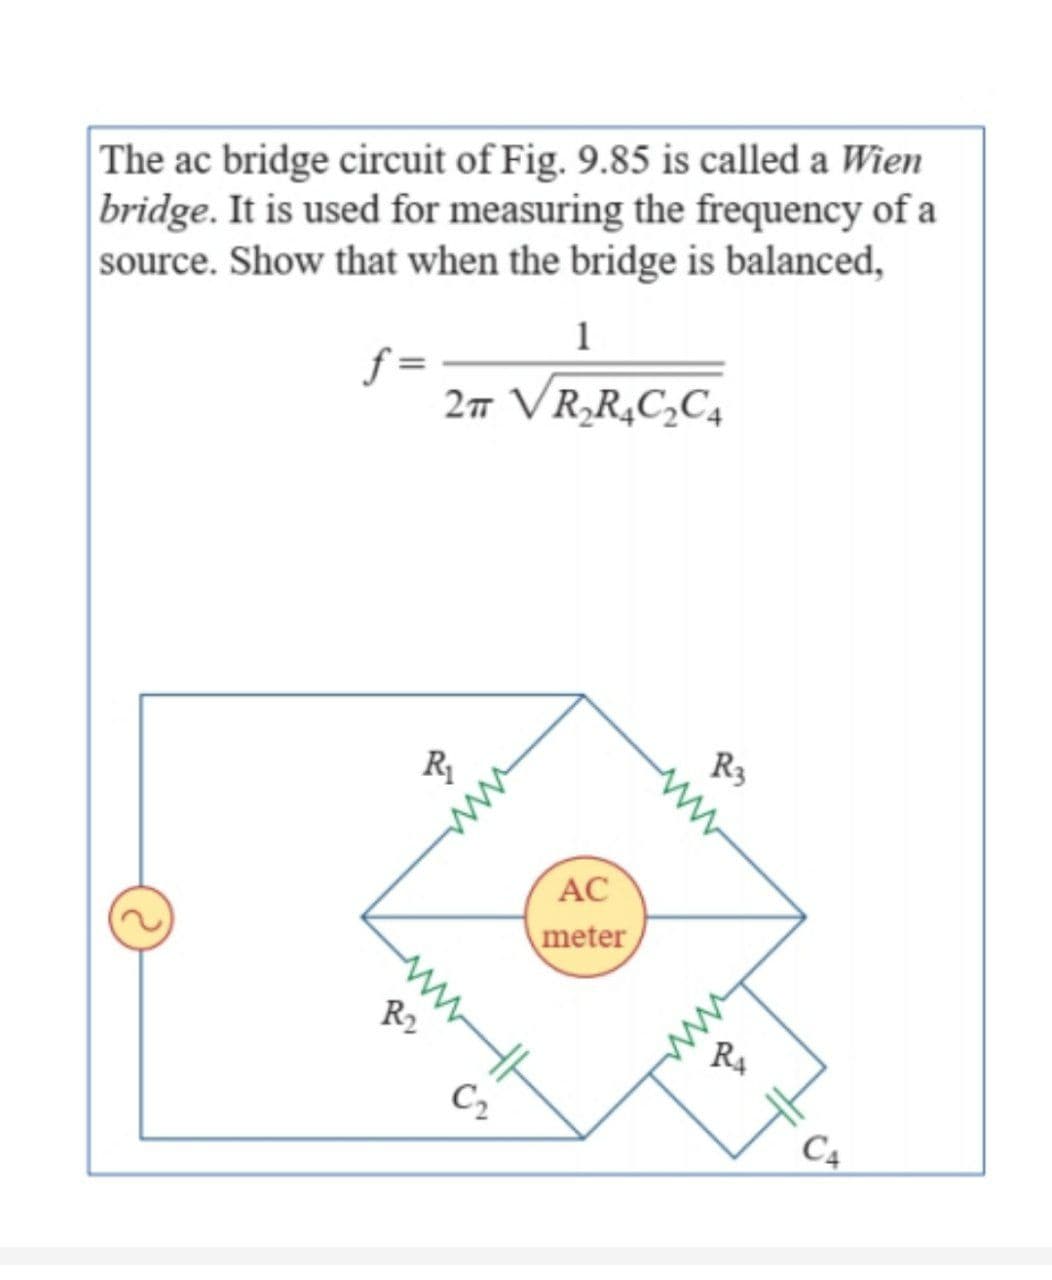 The ac bridge circuit of Fig. 9.85 is called a Wien
bridge. It is used for measuring the frequency of a
source. Show that when the bridge is balanced,
1
f=
2π VR₂R₂C₂C₂
R₁
www
C₂
AC
meter
ww
R3
R₁
C4